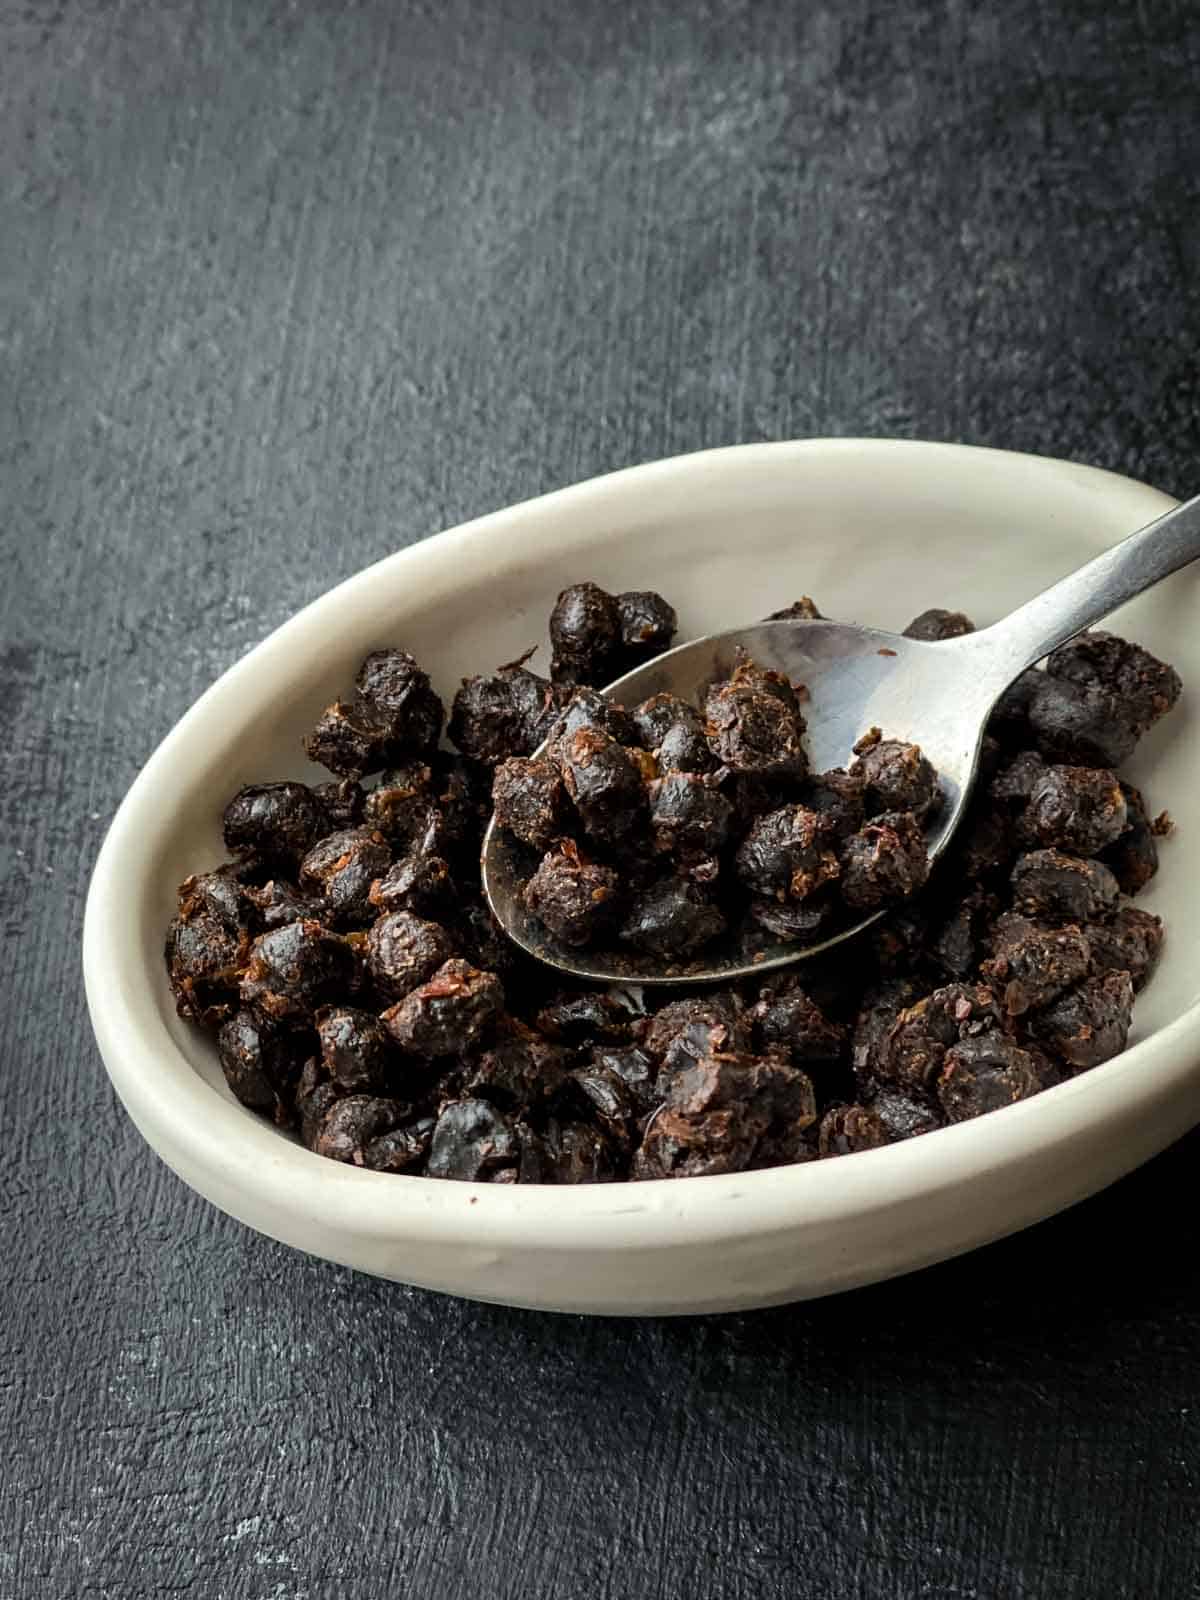 Fermented black beans in a small bowl being scooped out by a teaspoon